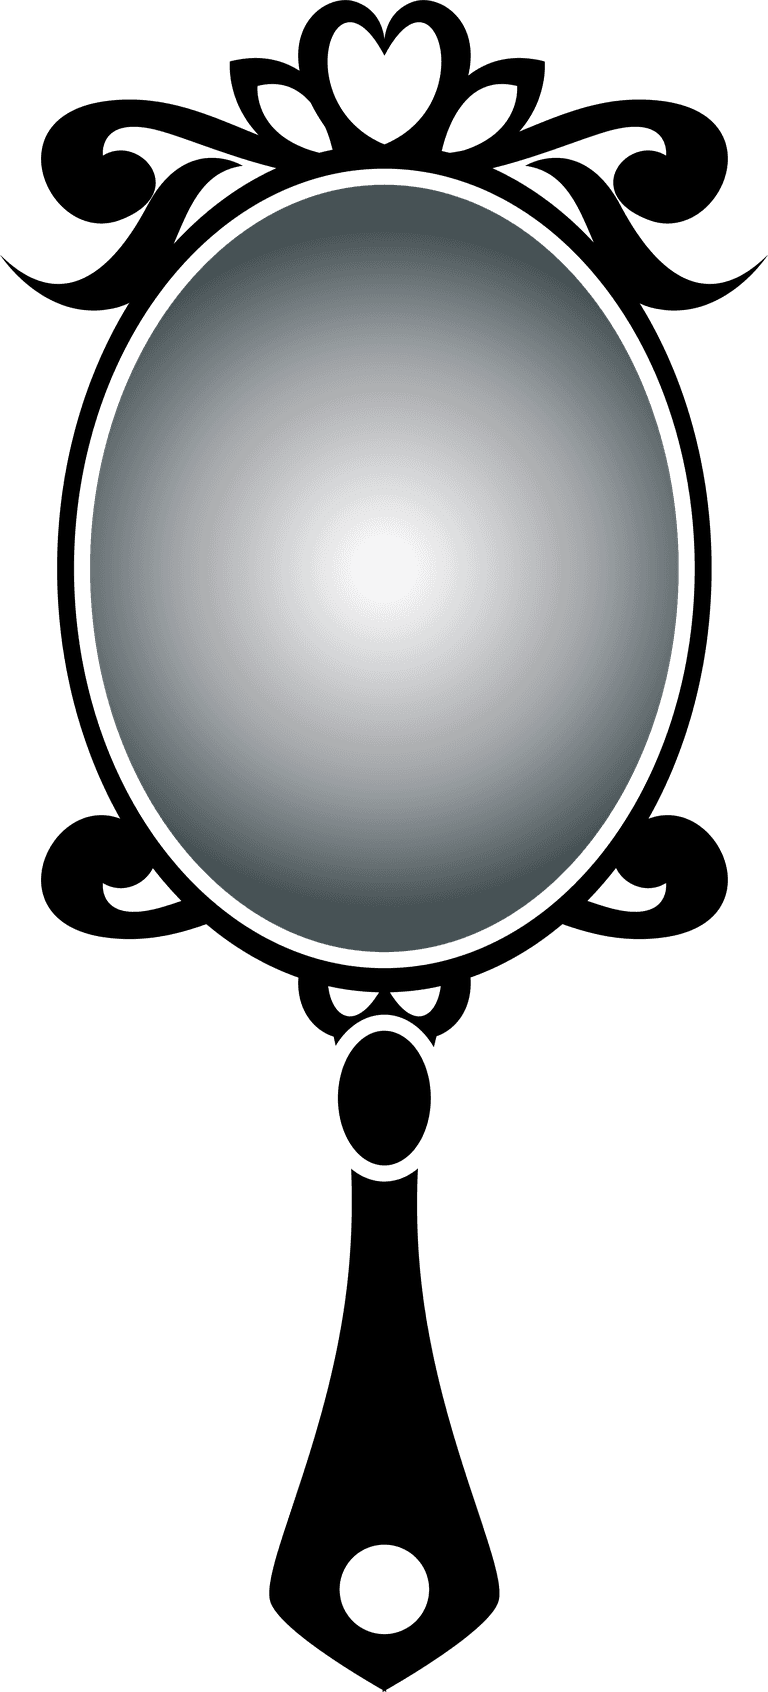 hand mirror collection of black vintage hand mirror vectors that have a swirly decorative style